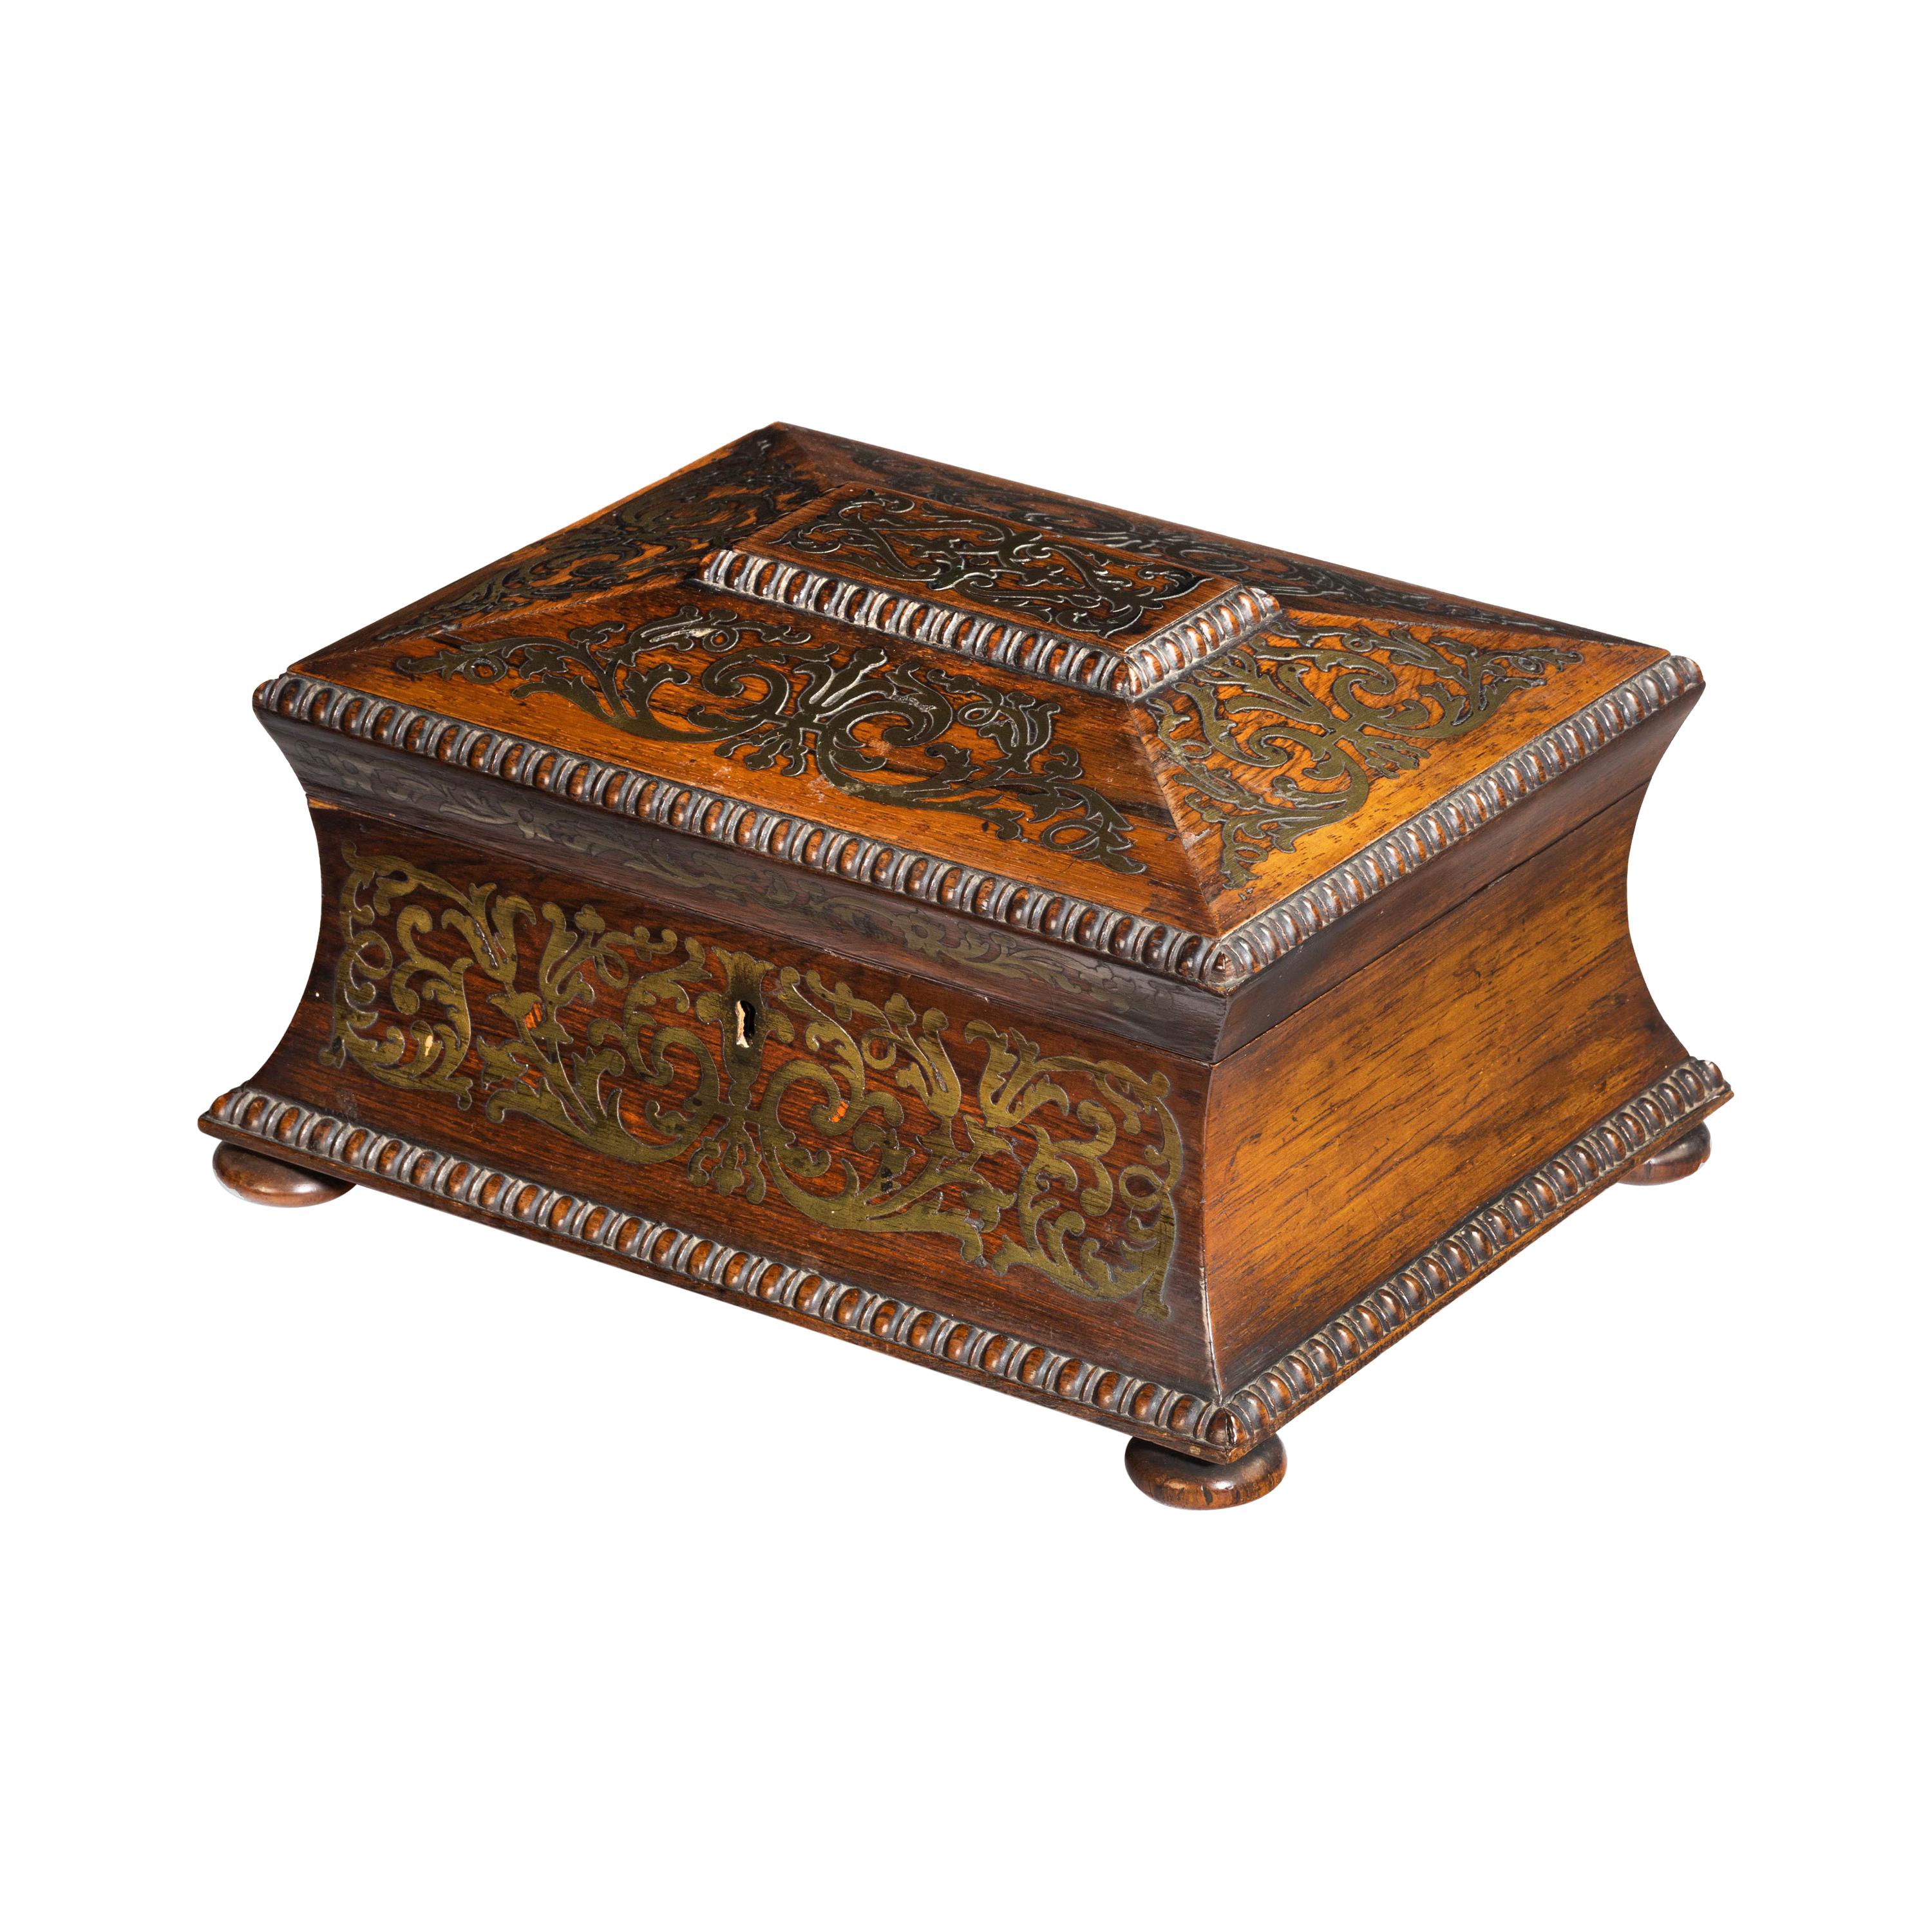 Exceptionally Fine Regency Period Waisted and Flared Brass Inlaid Caddy